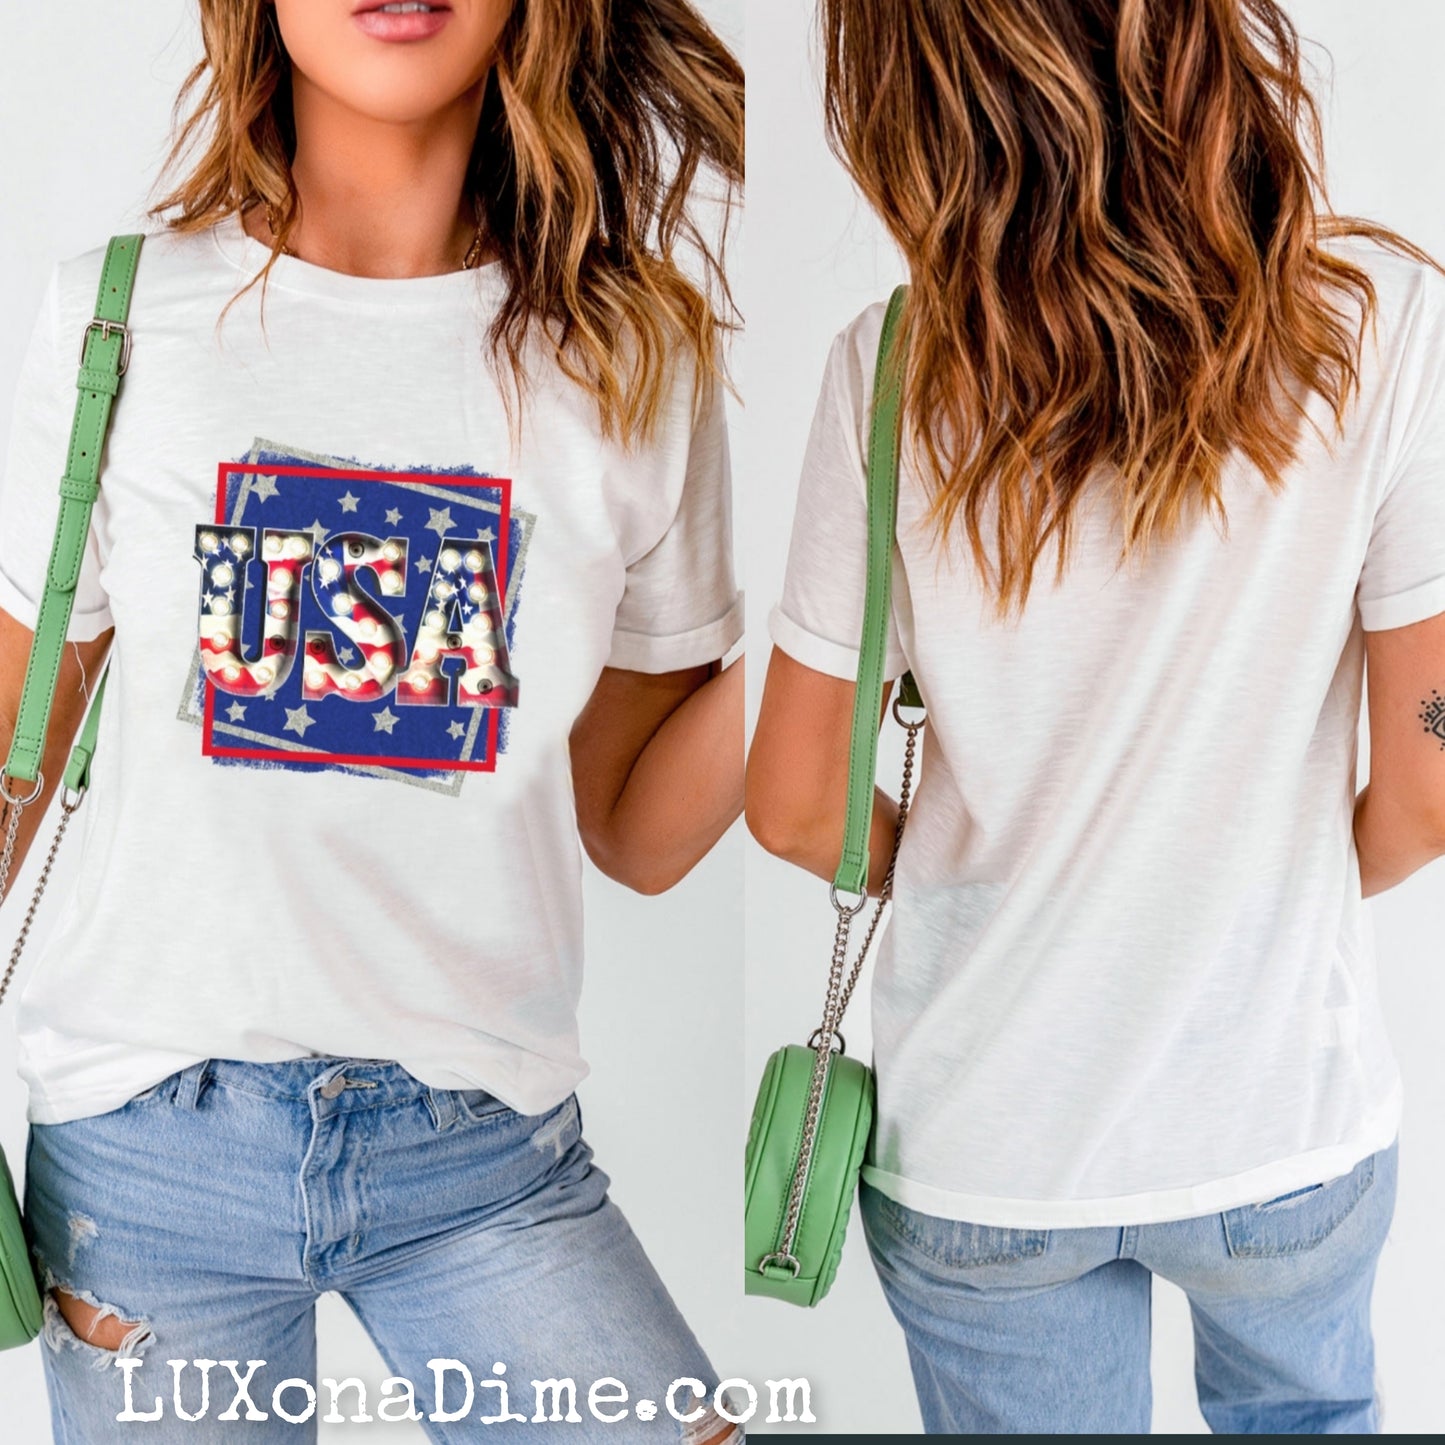 Patriotic USA Graphic Top Cuffed Short-Sleeve Tee Shirt
(Plus Size Available)